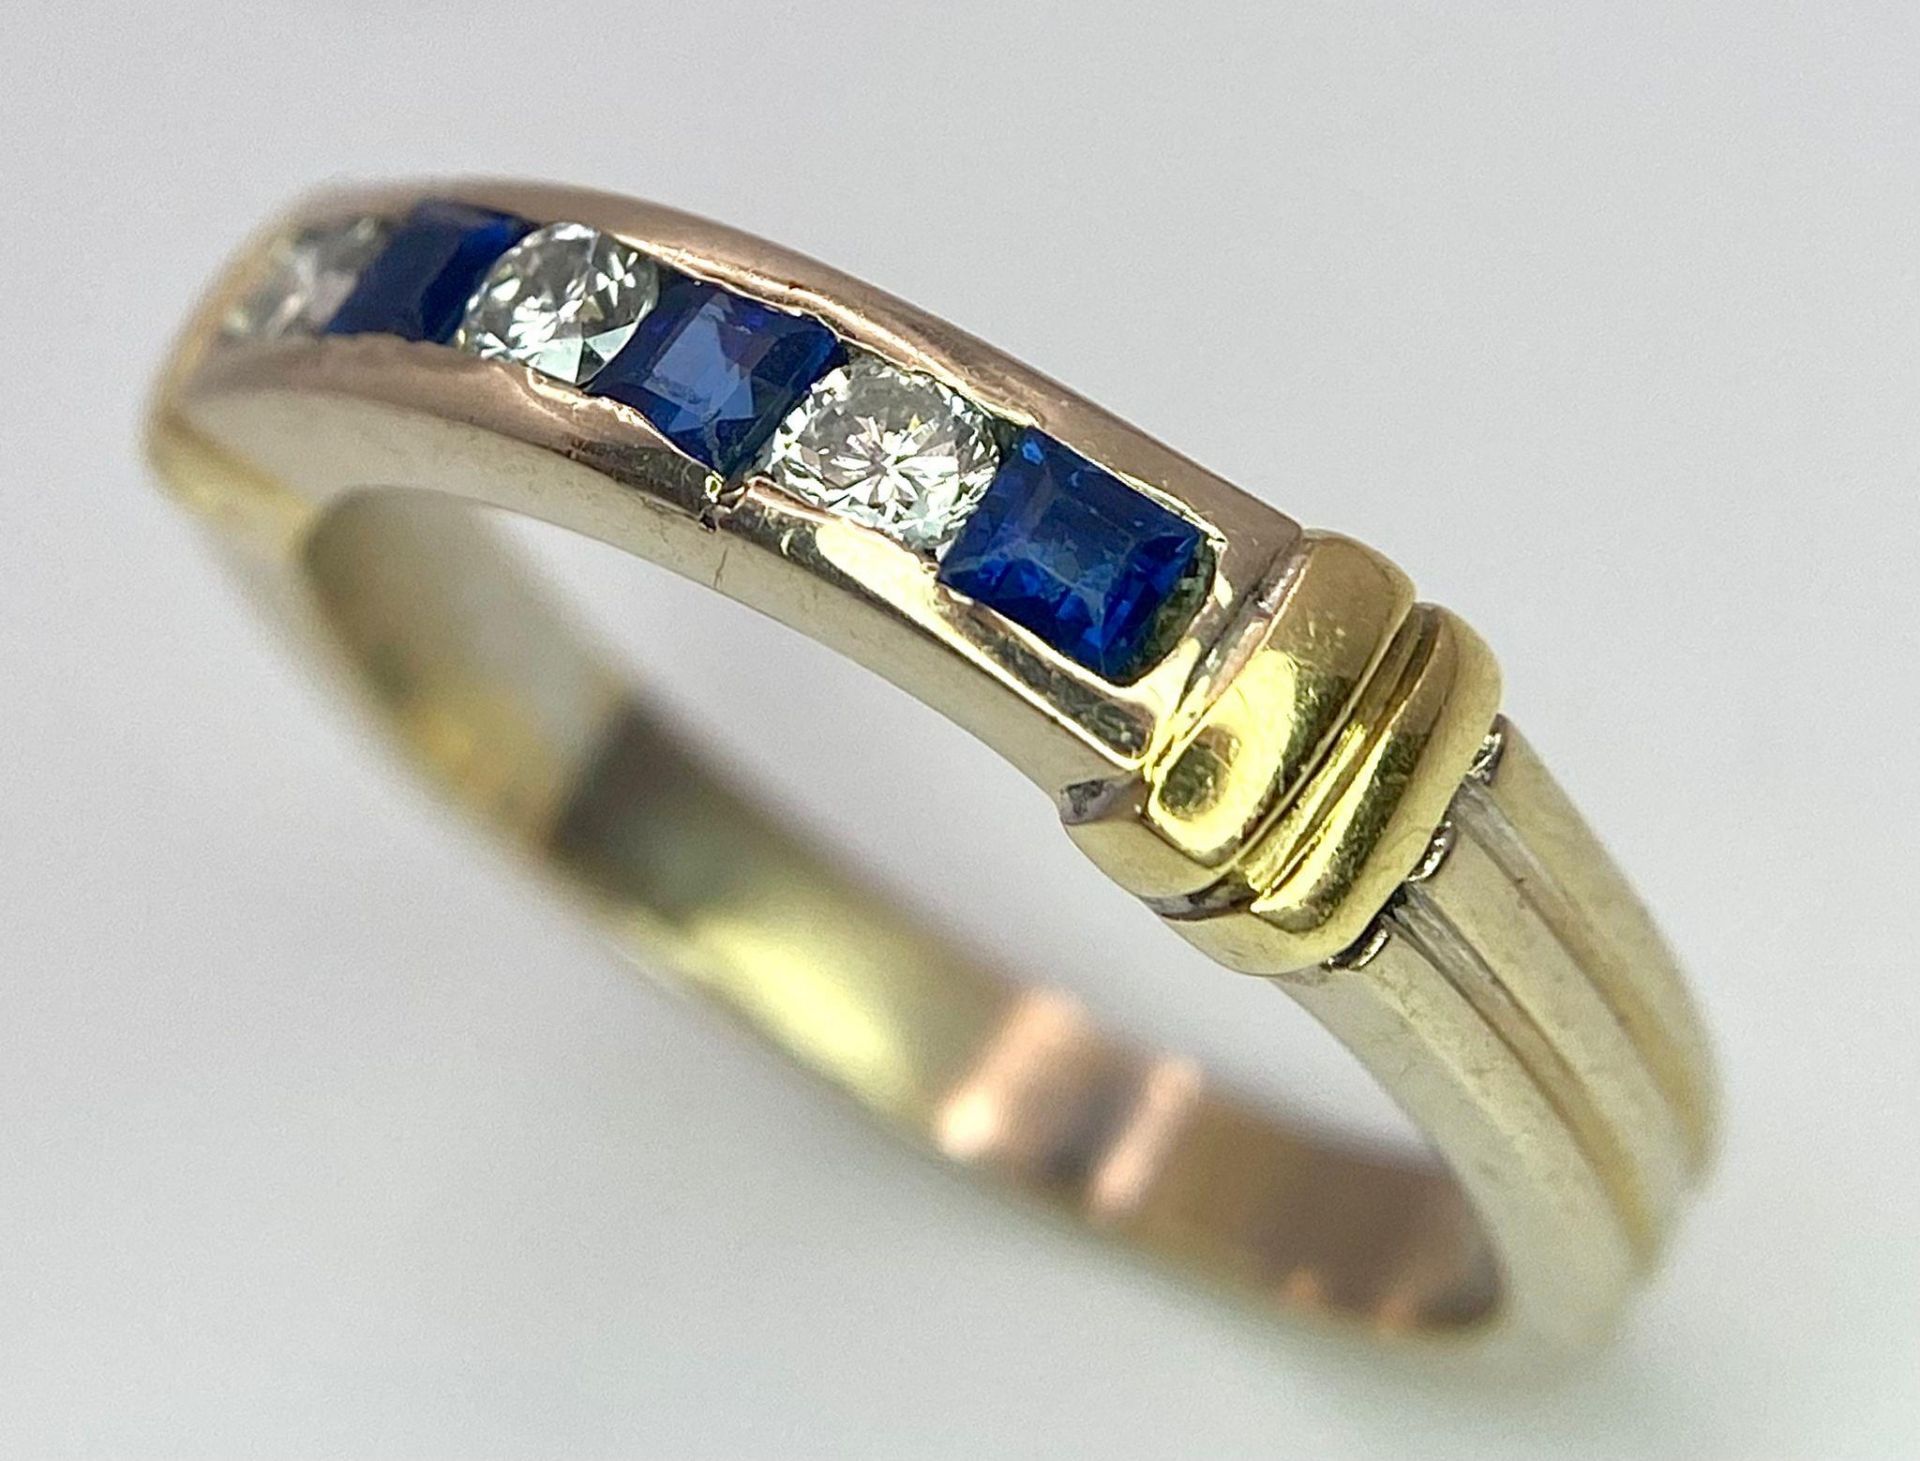 An 18 K yellow gold ring with alternating blue sapphires and diamonds. Size: K, weight: 3.2 g. - Image 2 of 13